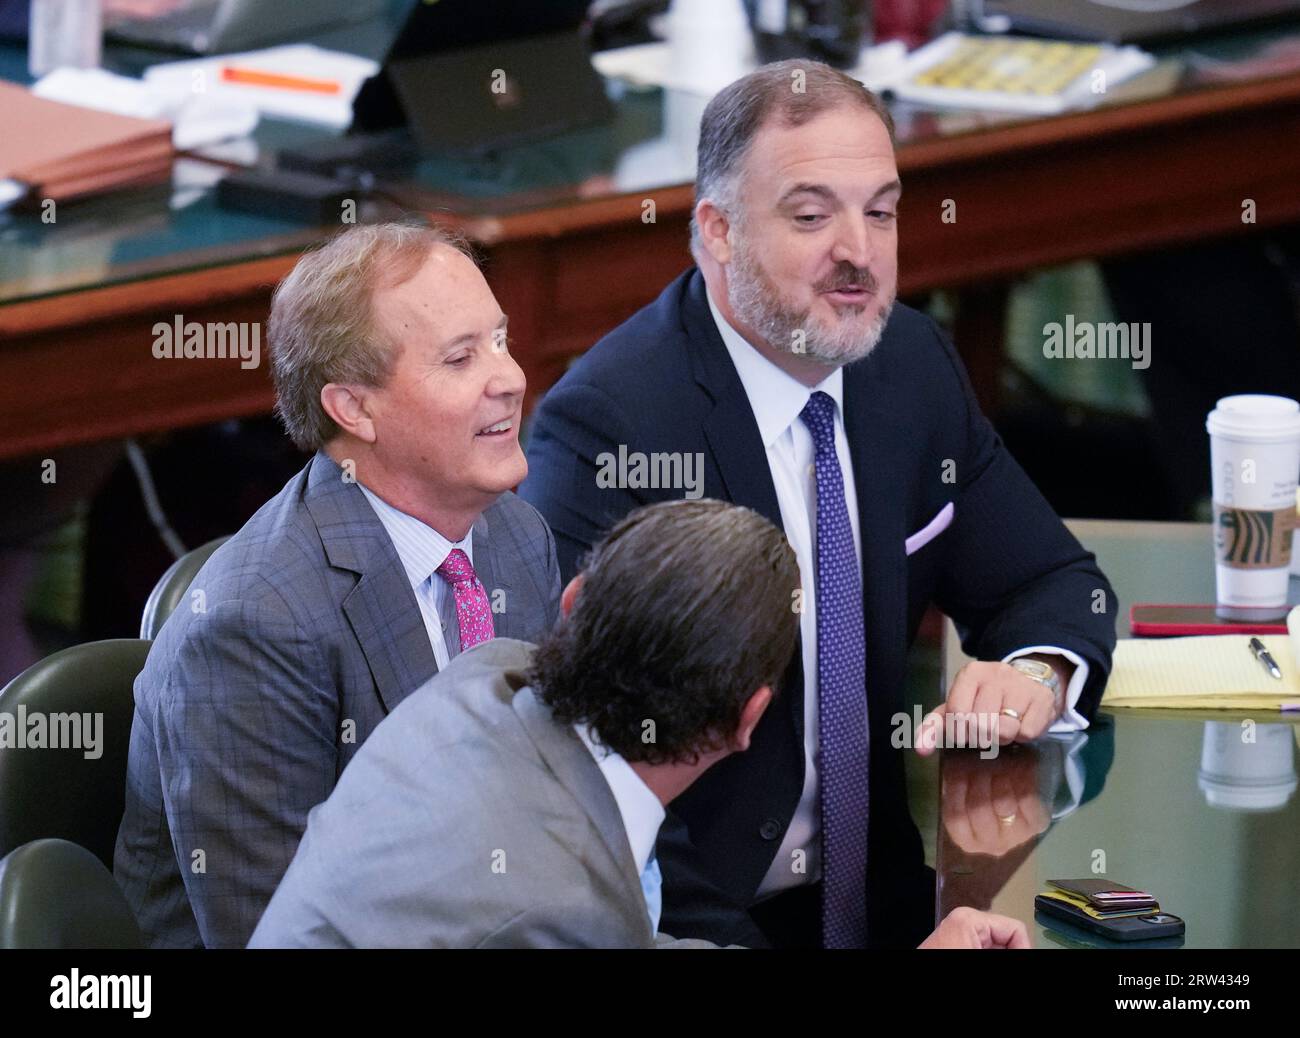 Austin, Texas, USA. 16th Sep 2023. Texas Attorney General KEN PAXTON smiles while he sits sits with his lawyers TONY BUZBEE and MITCH LITTLE before testimony on September 15, 2023. Paxton will be reinstated as Texas Attorney General after surviving an impeachment vote on 16 counts in the Texas Senate on September 16, 2023. Paxton did not attend the final day of the trial. Credit: Bob Daemmrich/Alamy Live News Stock Photo